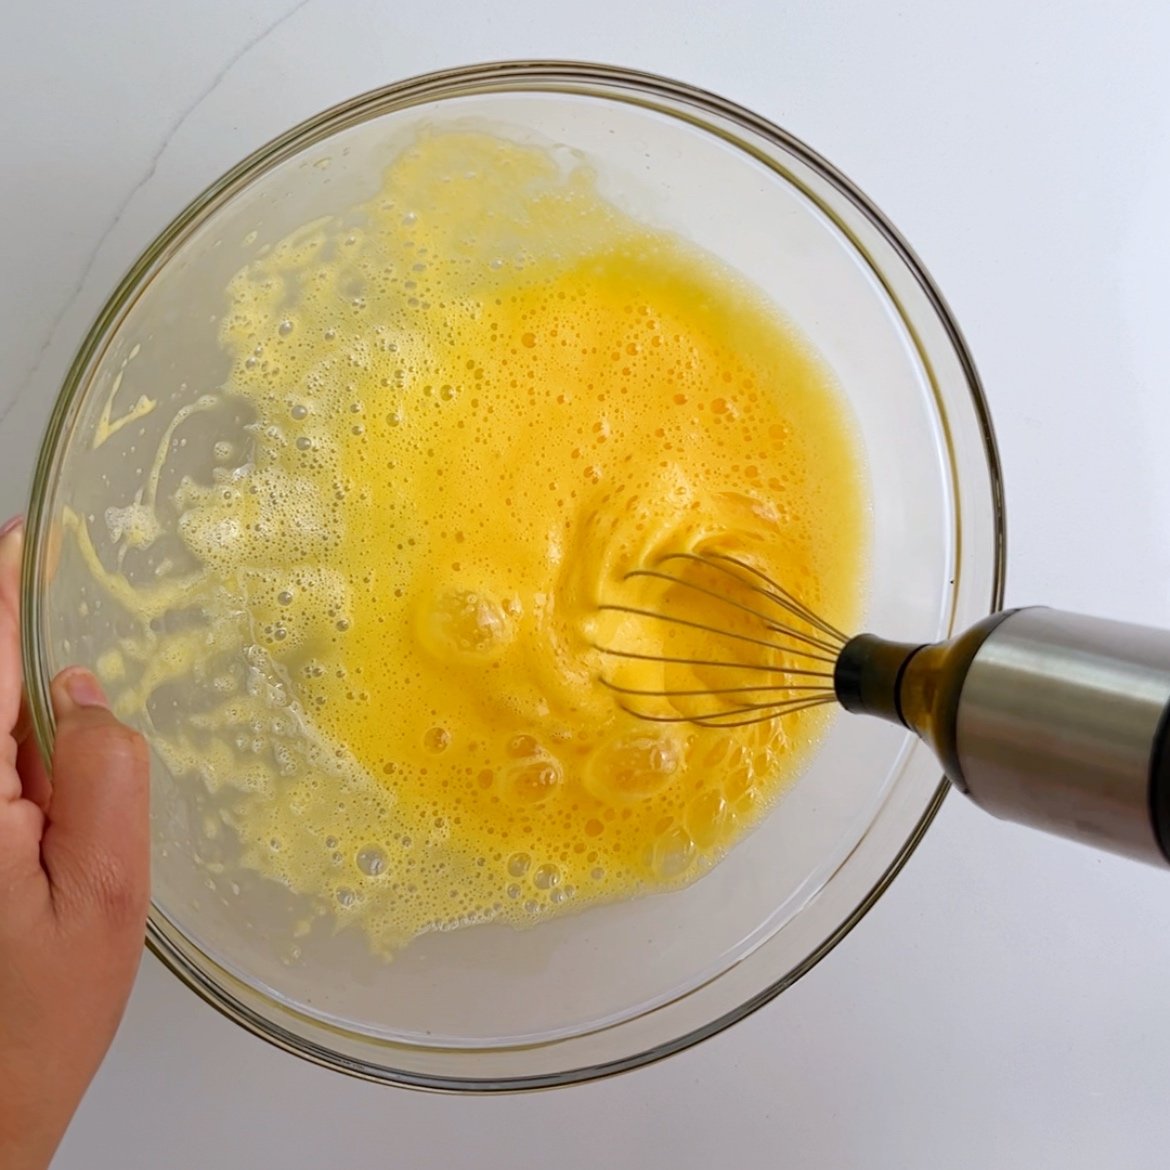 Whisking eggs in a glass bowl with an electric whisk